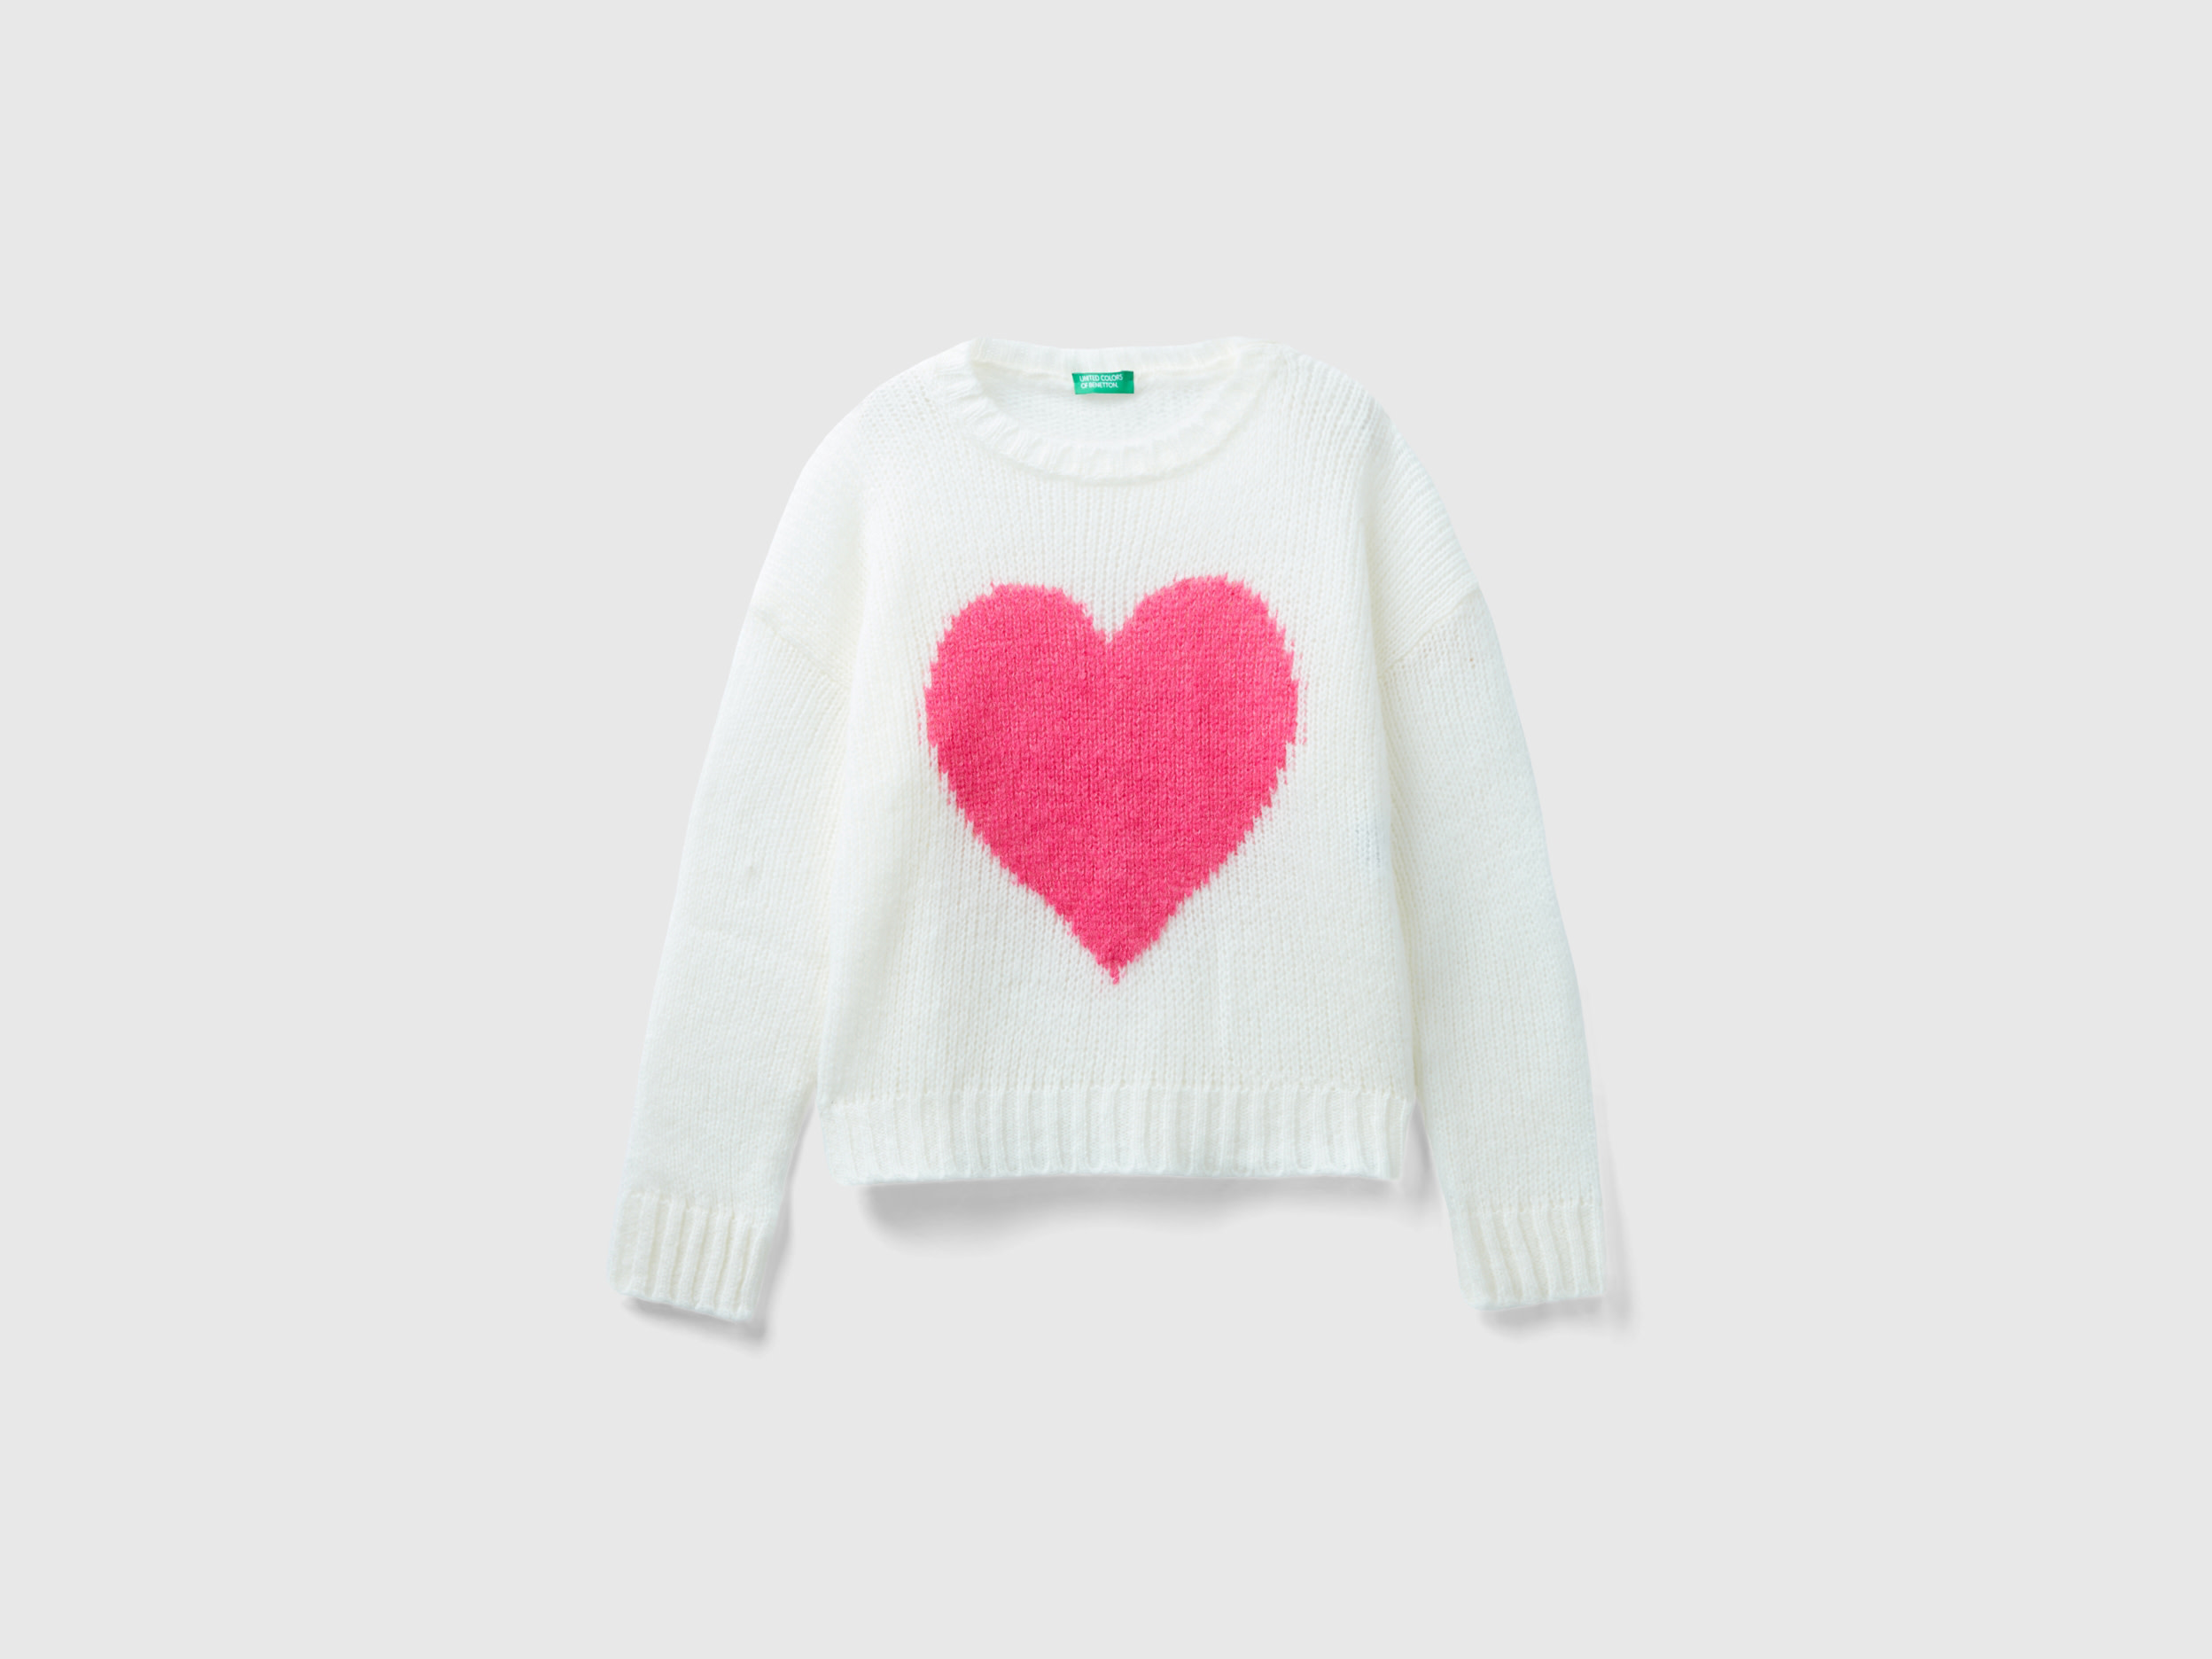 Benetton, Sweater With Heart Inlay, size 3XL, White, Kids